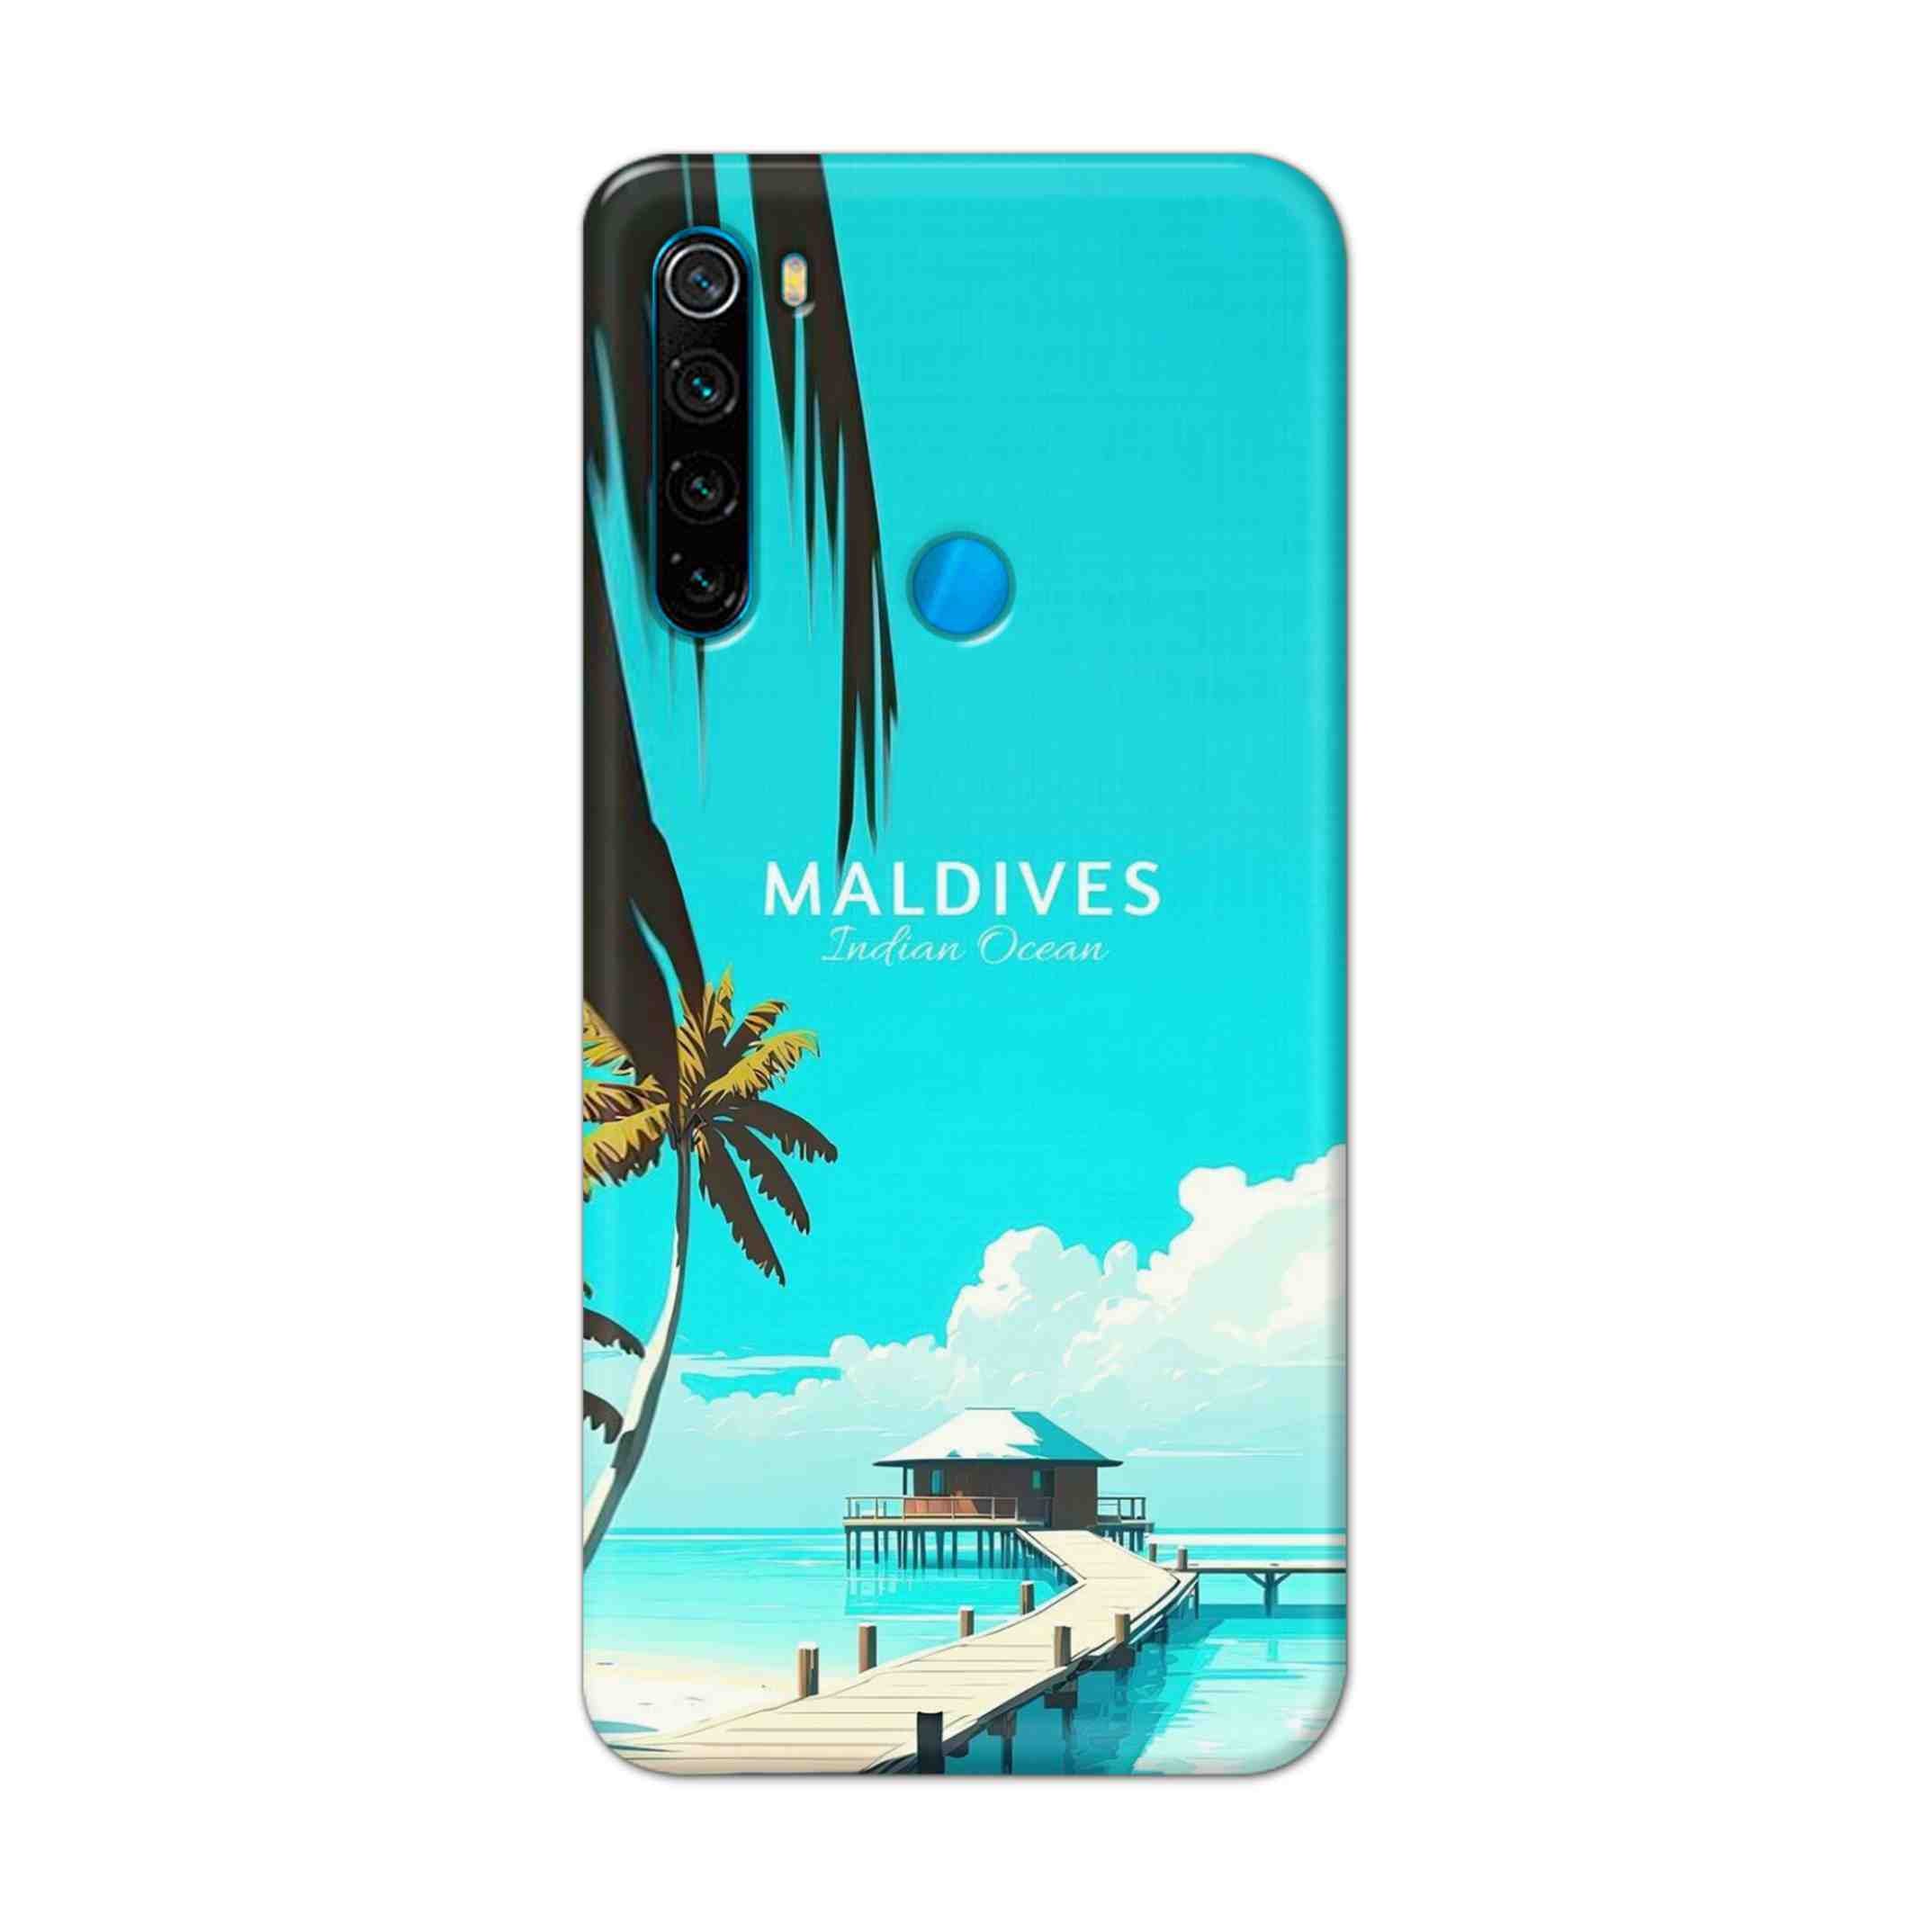 Buy Maldives Hard Back Mobile Phone Case Cover For Xiaomi Redmi Note 8 Online